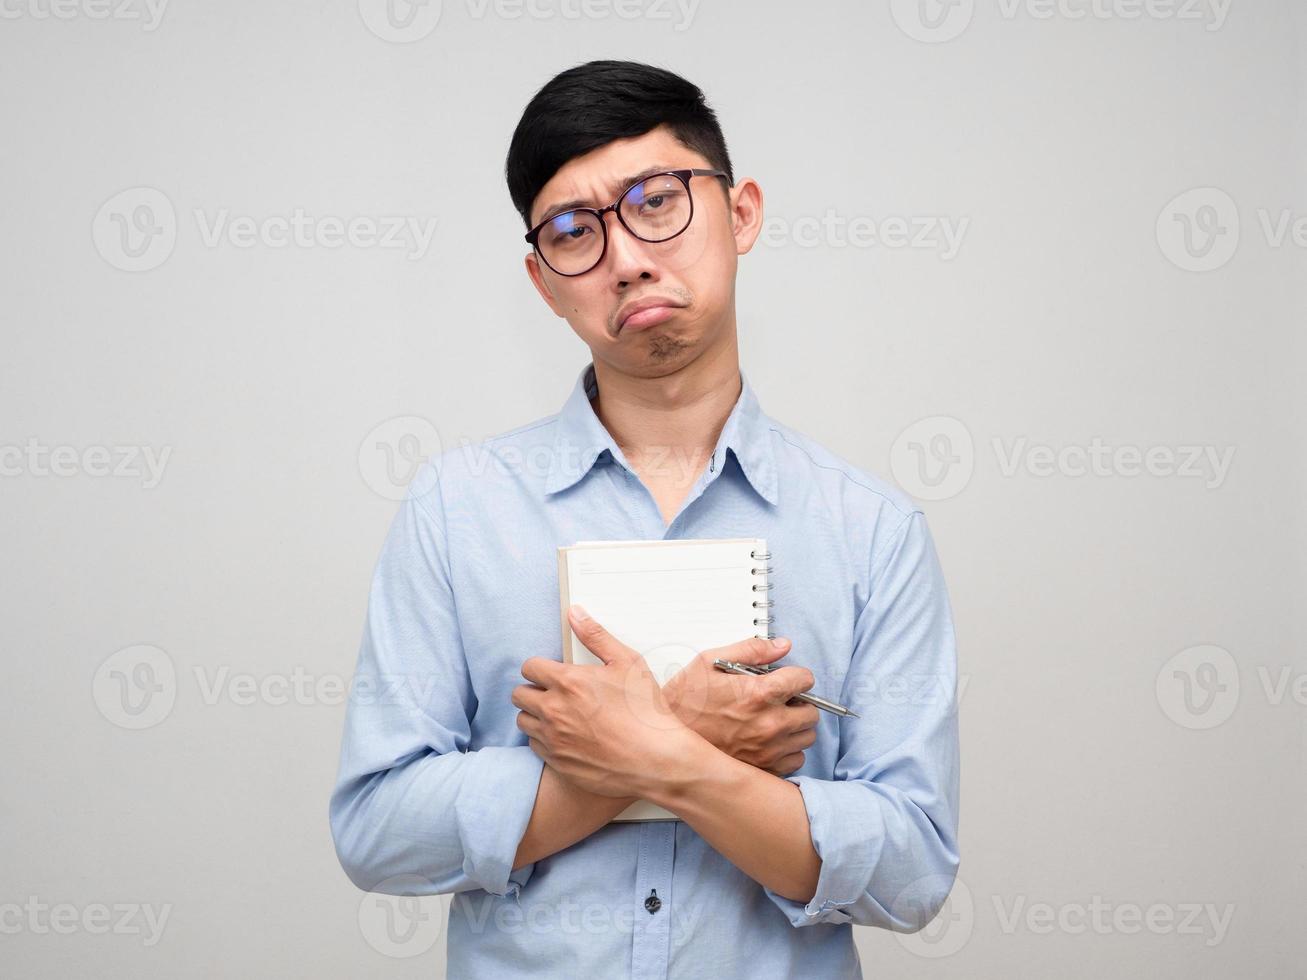 Businessman blue shirt feels bored about his working gesture tried isolated photo